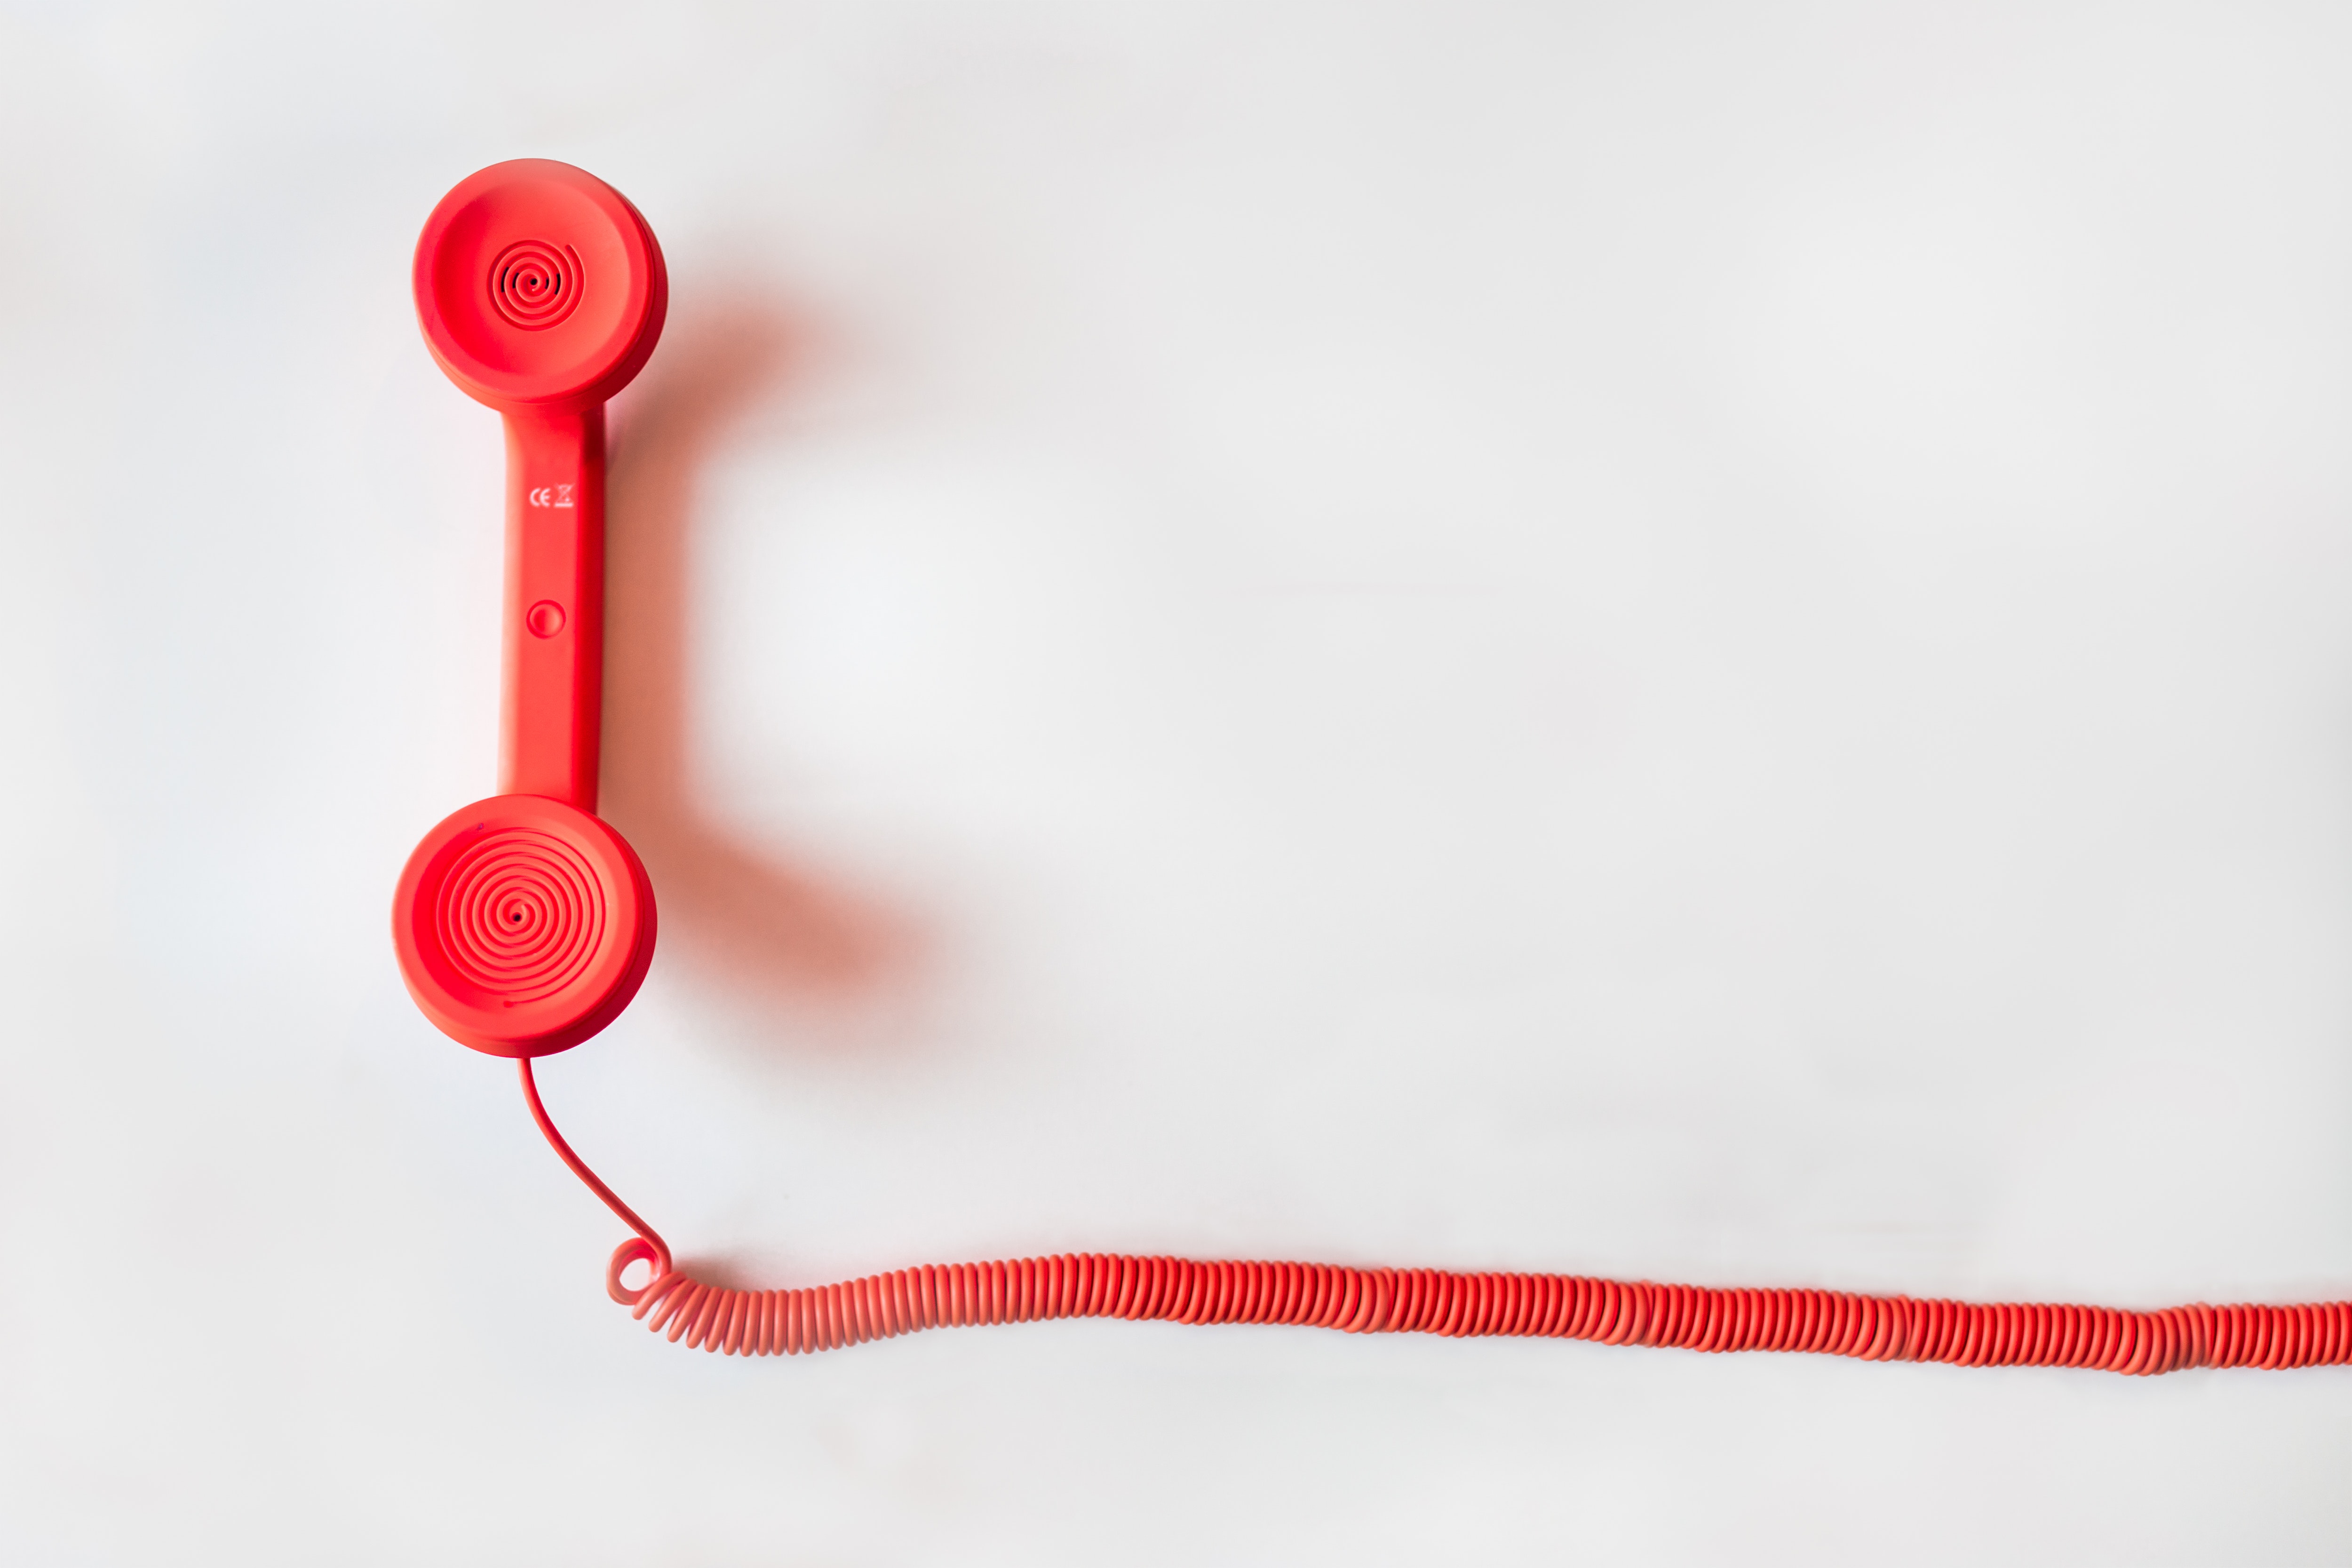 Red old style telephone handset with length of red spiral cord coming from bottom of the handset